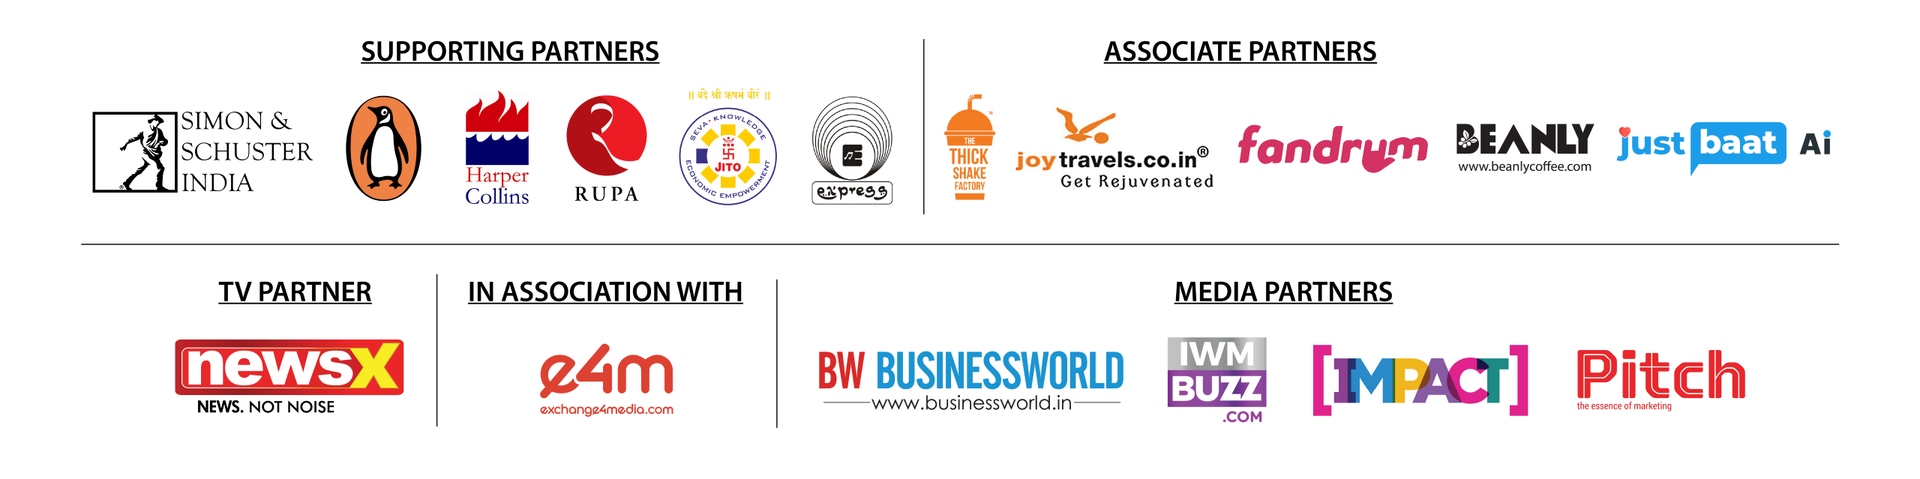 JoyTravels, Fandrum, IWM BUZZ, Beanly, The Thick shake Factory, Exhange4Media, Institute of Management Technology - Ghazizabad Delhi NCR, Impact, Pitch, AACSB